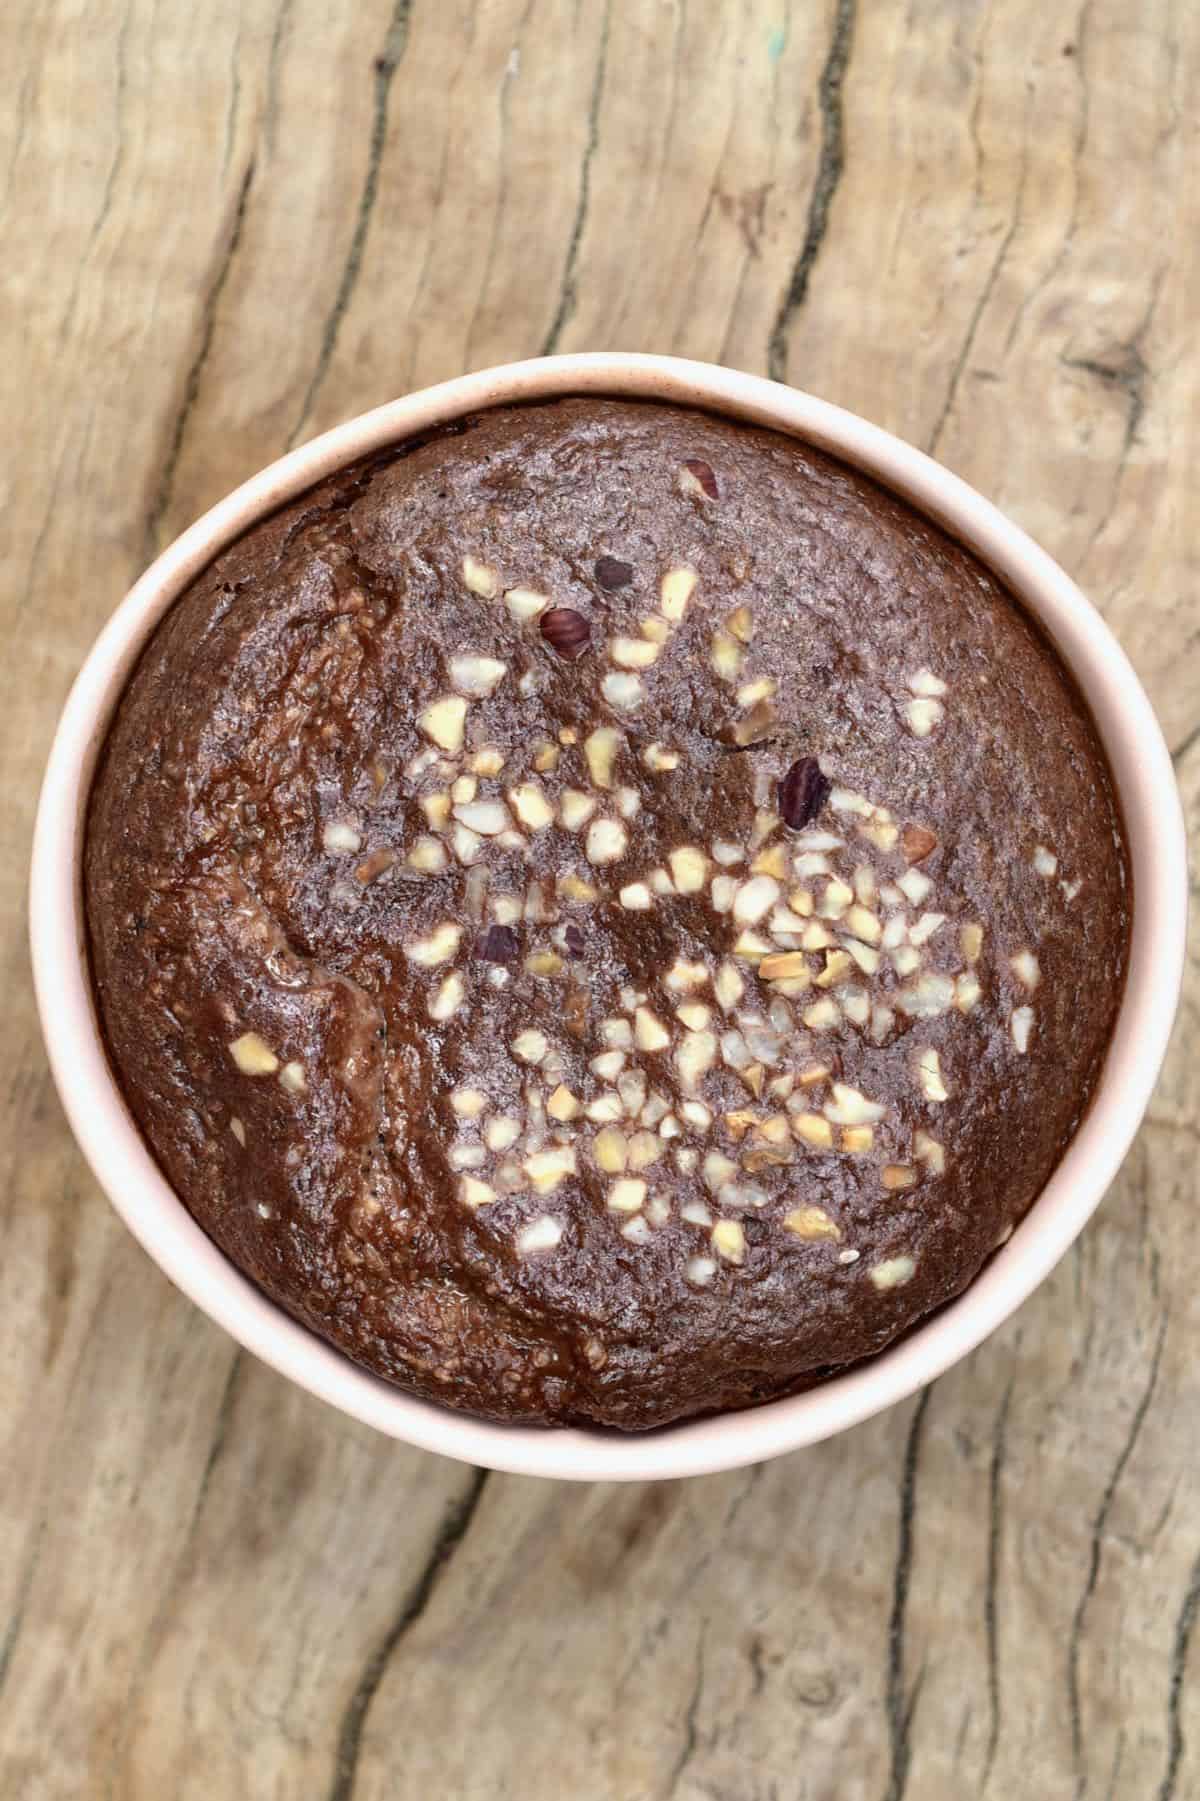 Baked chocolate oats topped with chopped hazelnuts